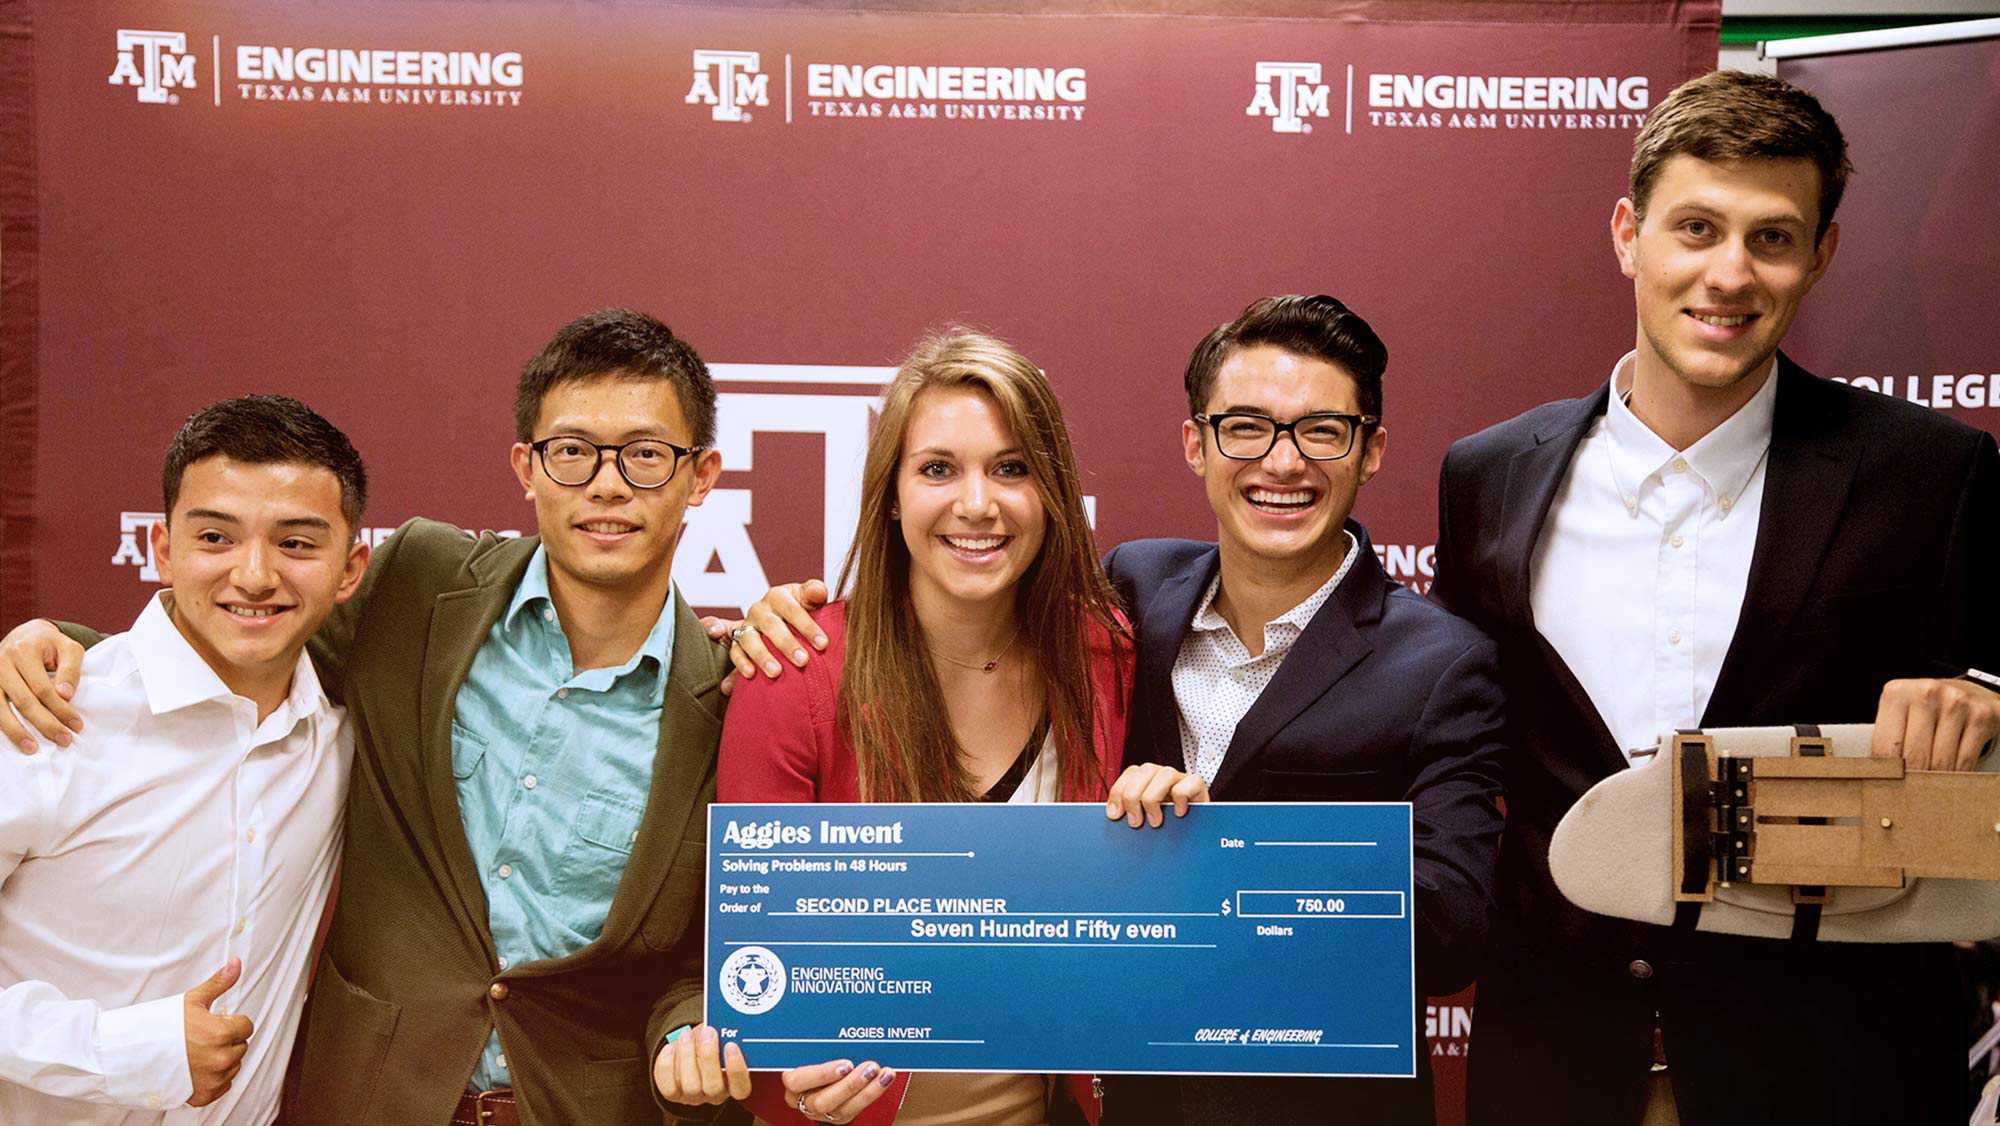 Texas A&M University Engineering 5 student holding each others shoulders their project and a check Aggies Invent Solving Problems in 48 hours pay to the order of Second Place Winner Seven Hundred and Fifty Even Dollars Engineering Innovation Center.